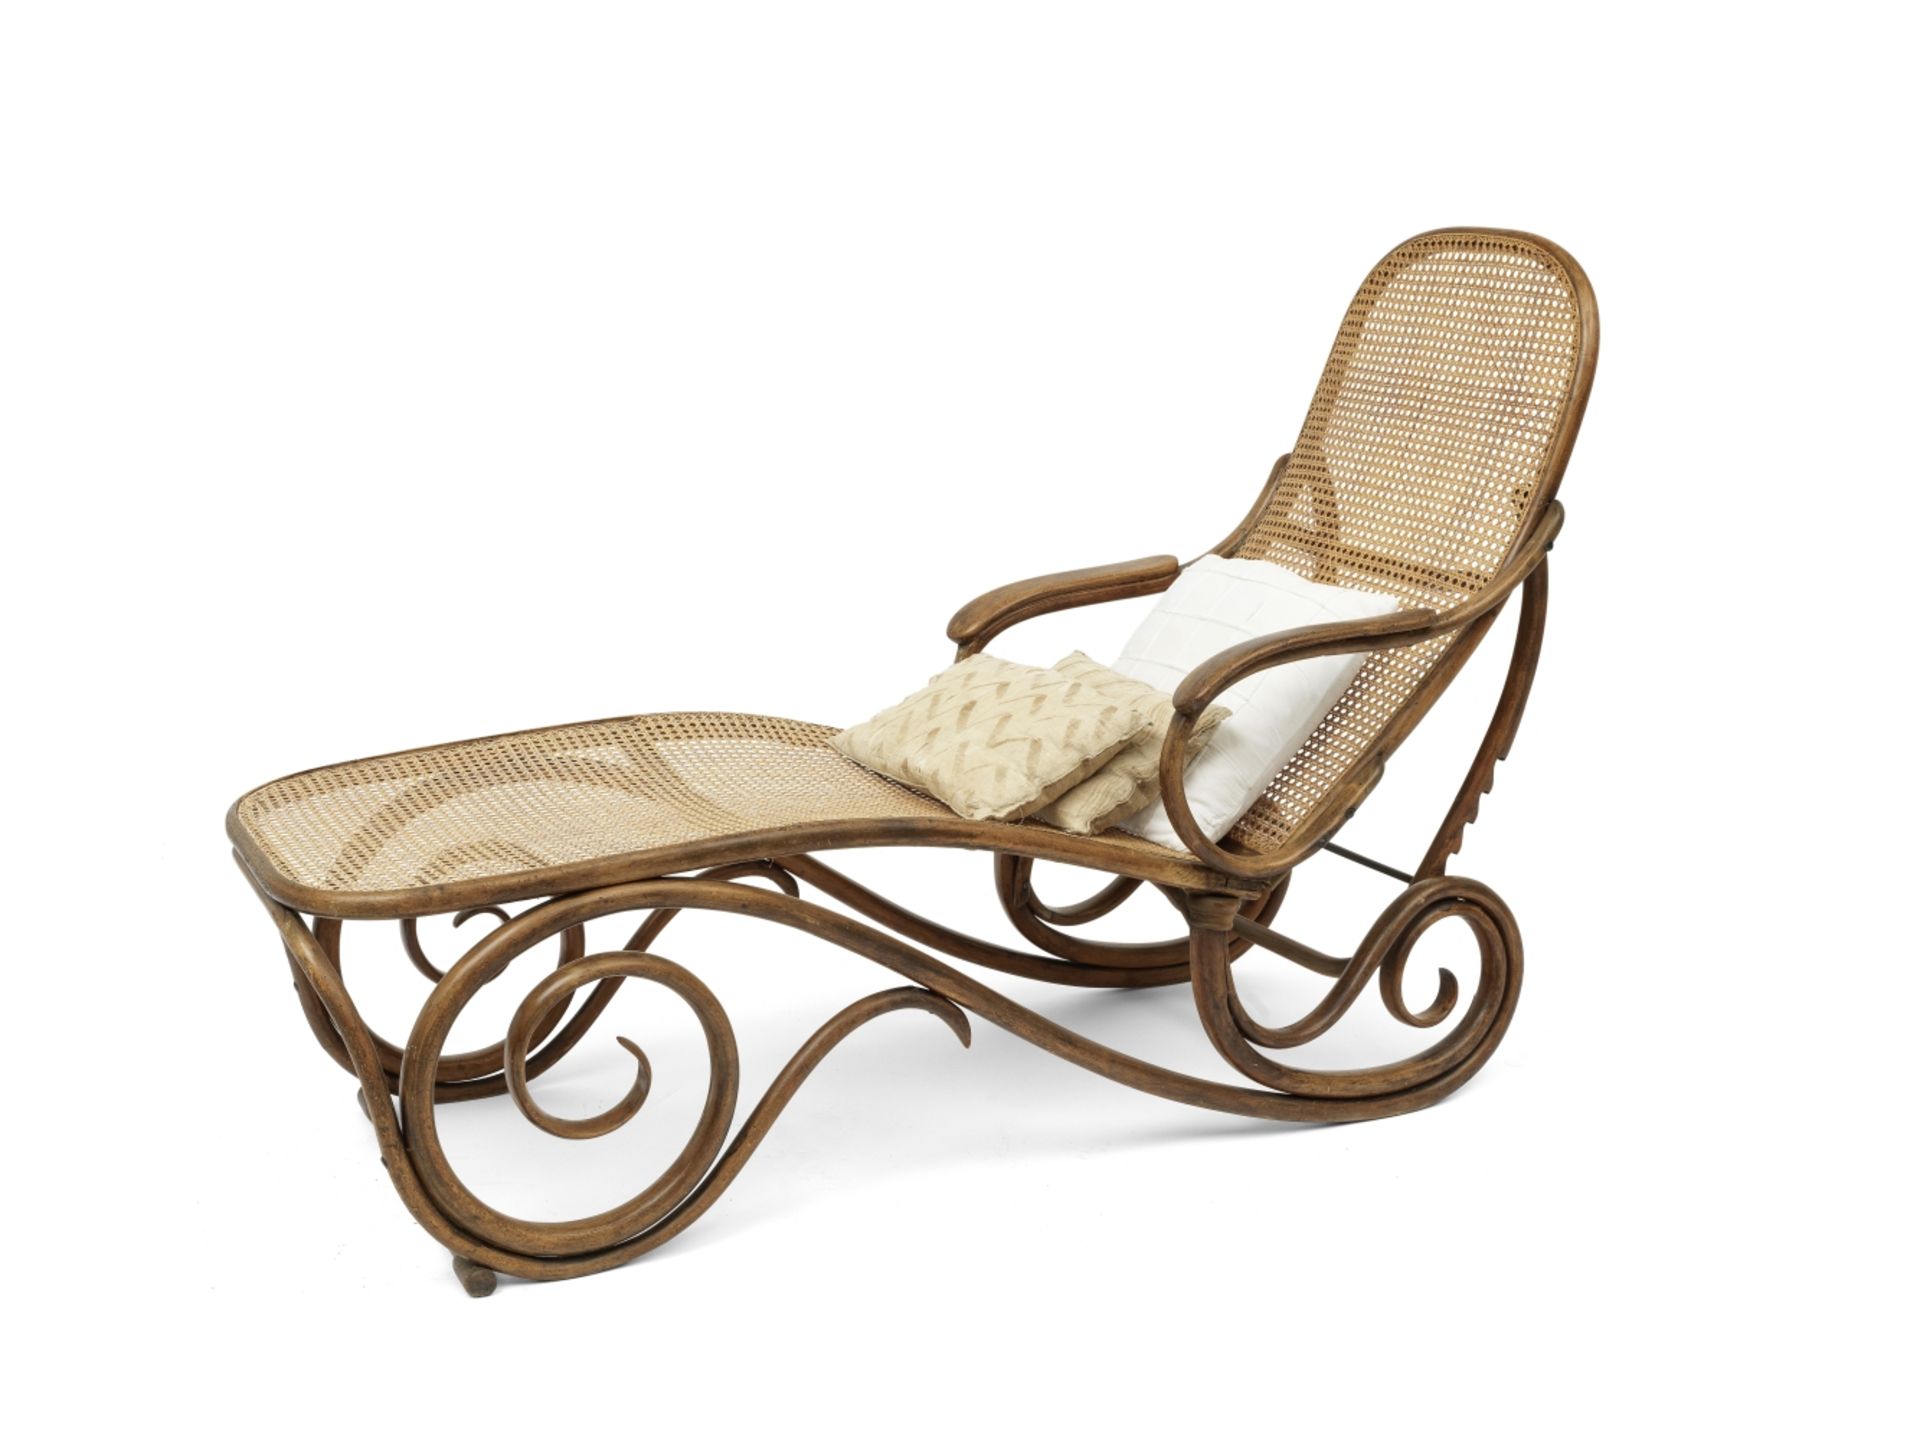 A Thonet caned beech bentwood chaise longue Model number 9702, circa 1890